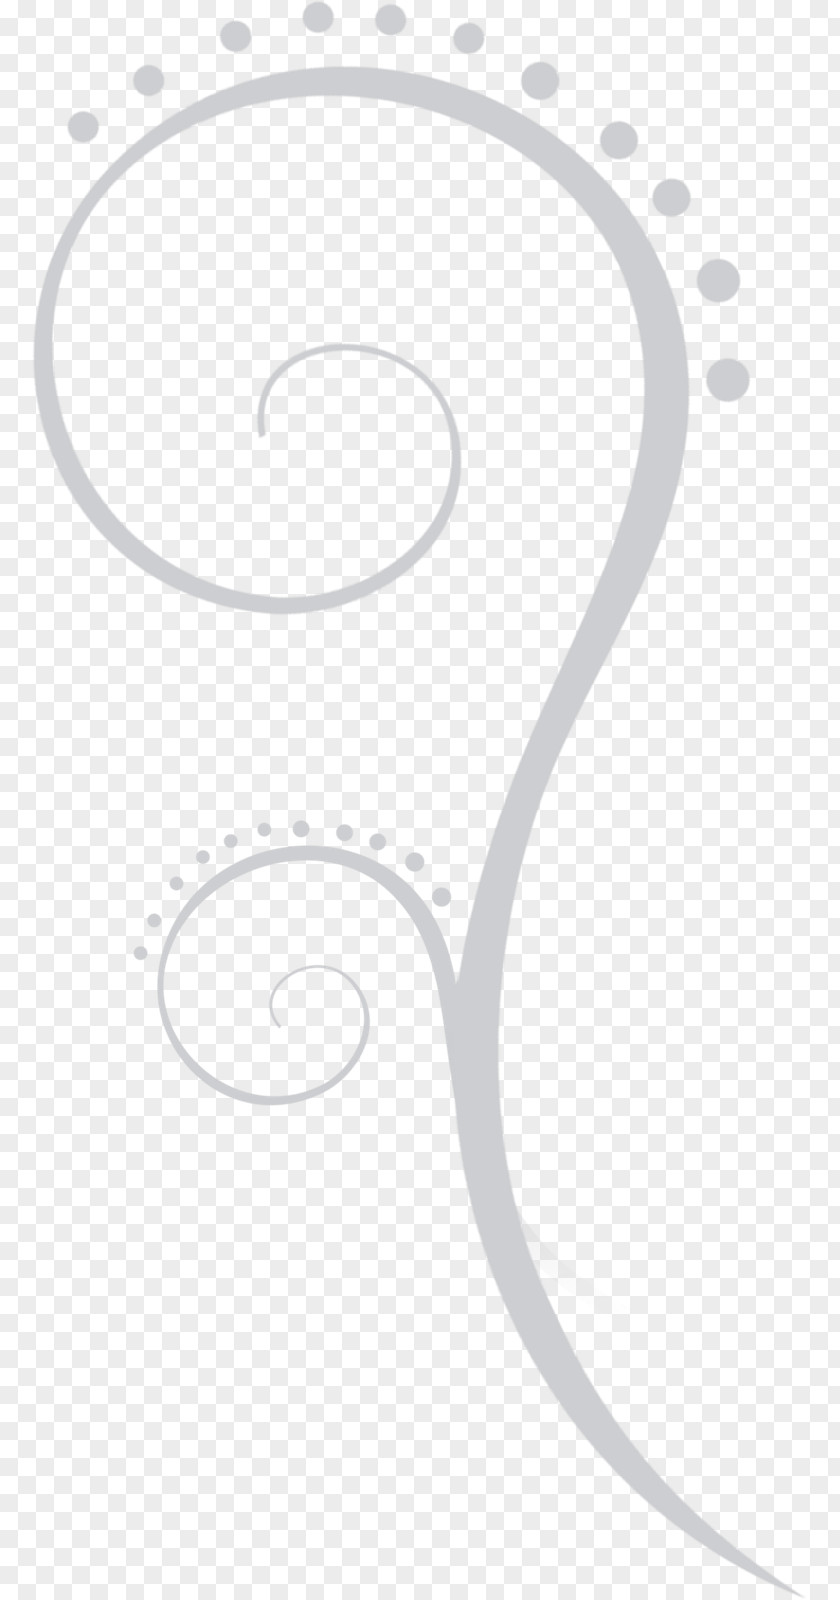 Swirls Black And White Clip Art PNG